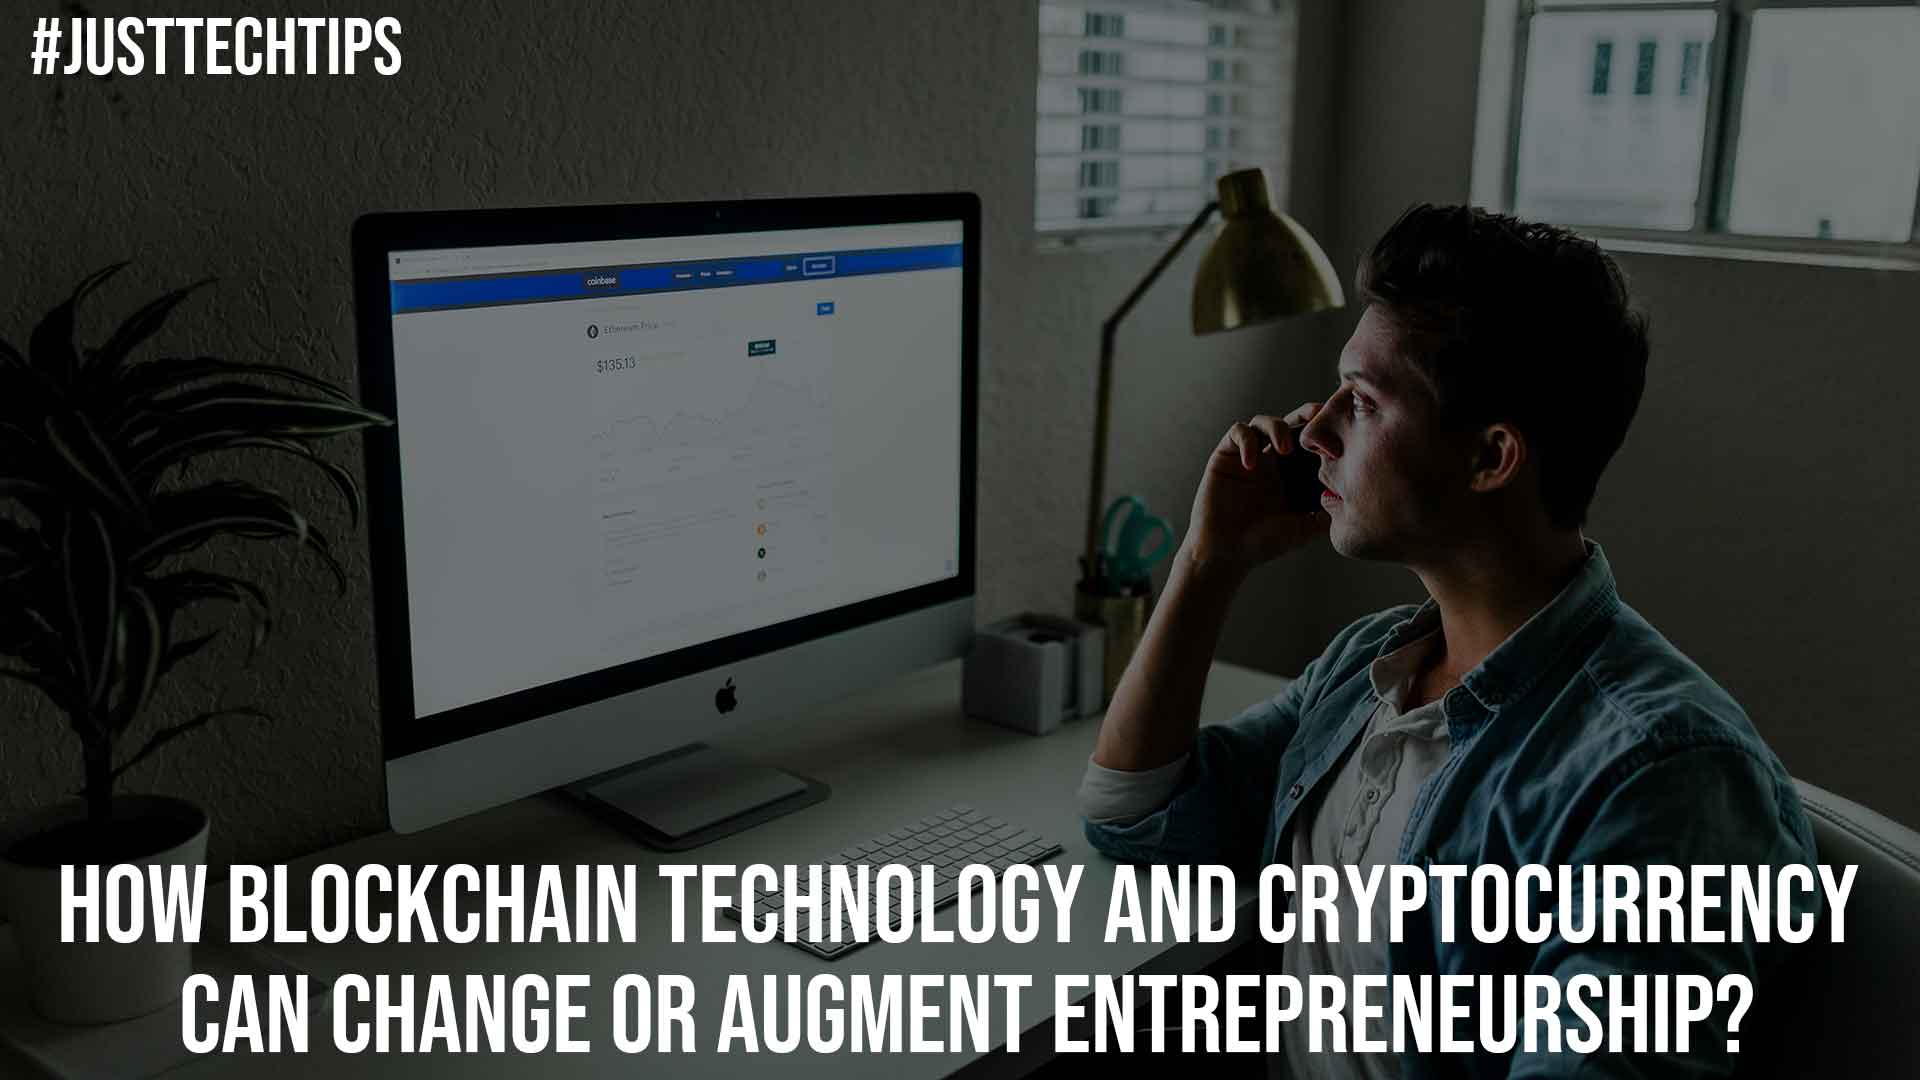 How Blockchain Technology and Cryptocurrency Can Change or Augment Entrepreneurship